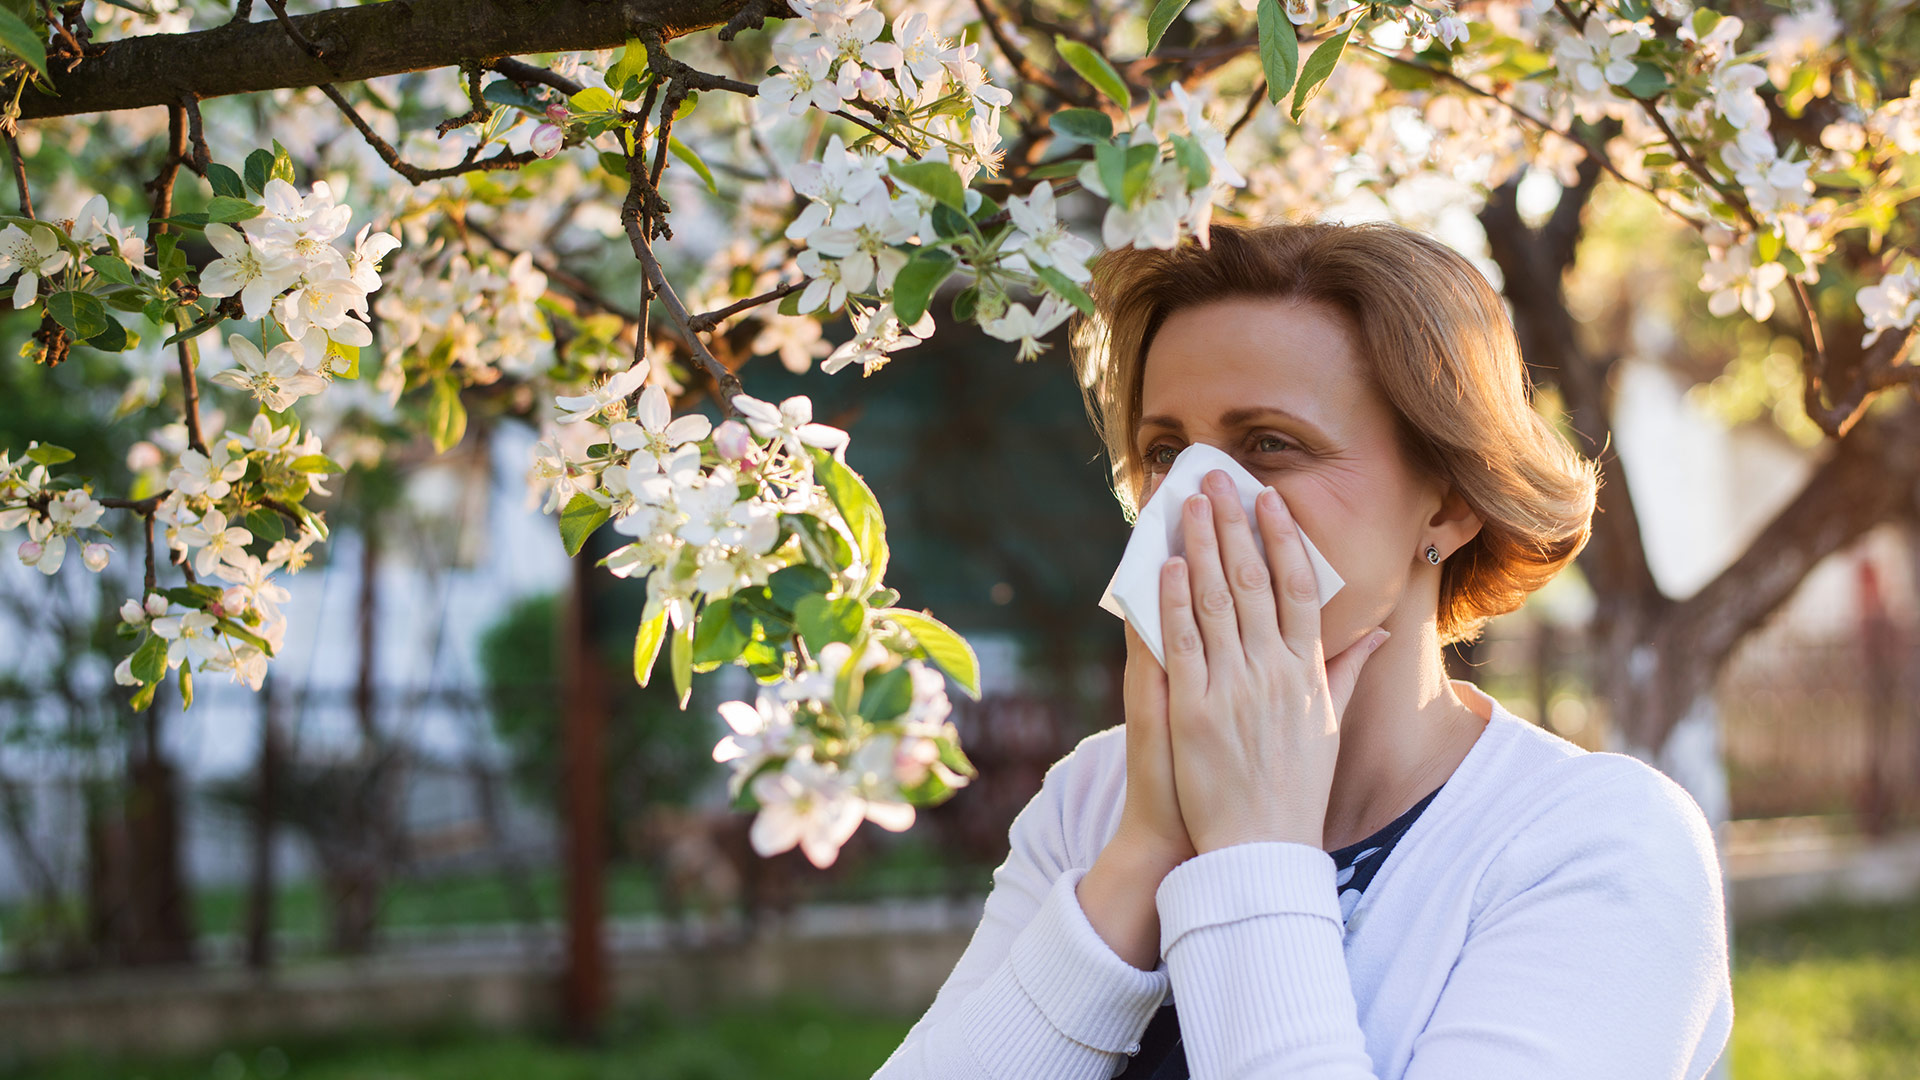 Daily Dose - The Allergy Facts You Need Right Now